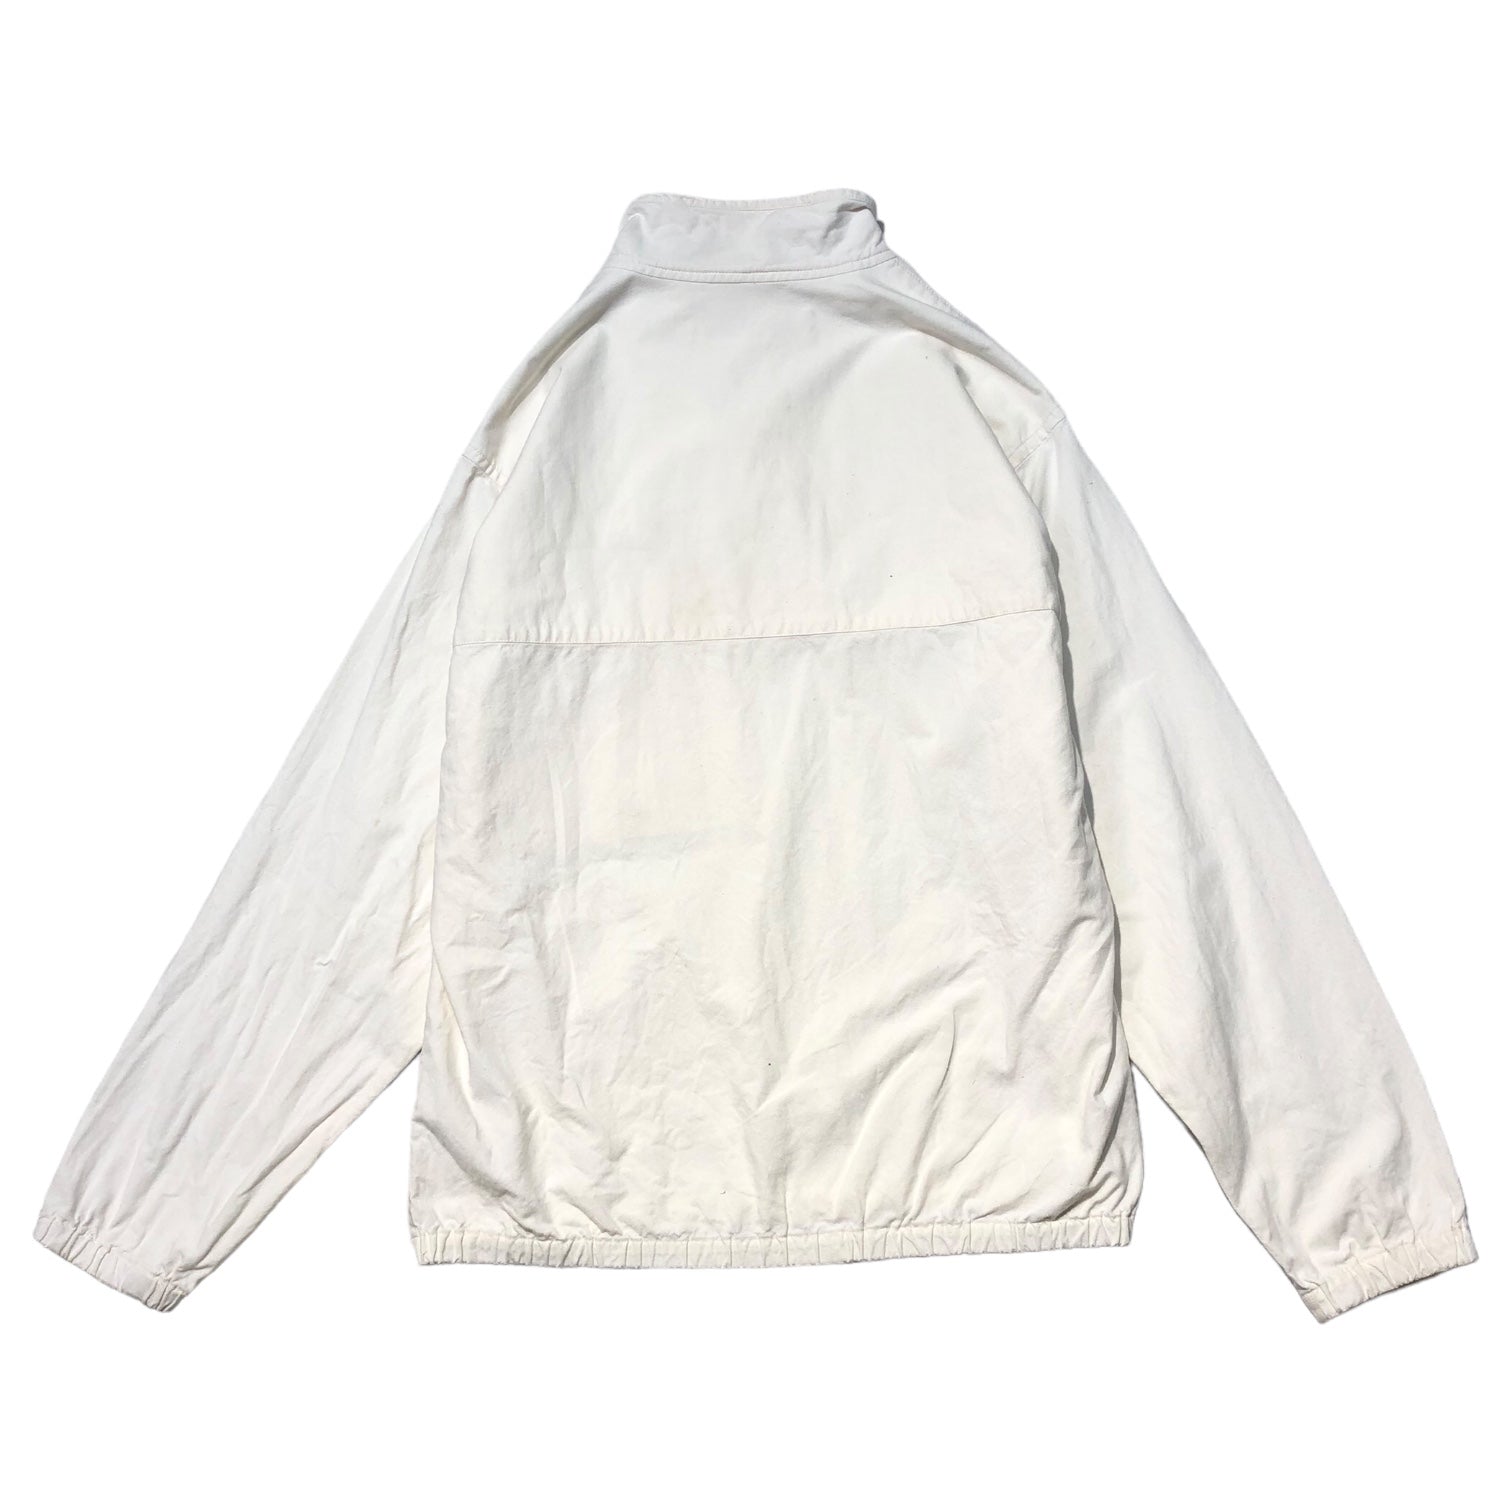 POLYPLOID(ポリプロイド) 19SS SNAP T PULLOVER TYPE A 19SS-04-A 3(L) オフホワイト 参考定価41,040円(税込)